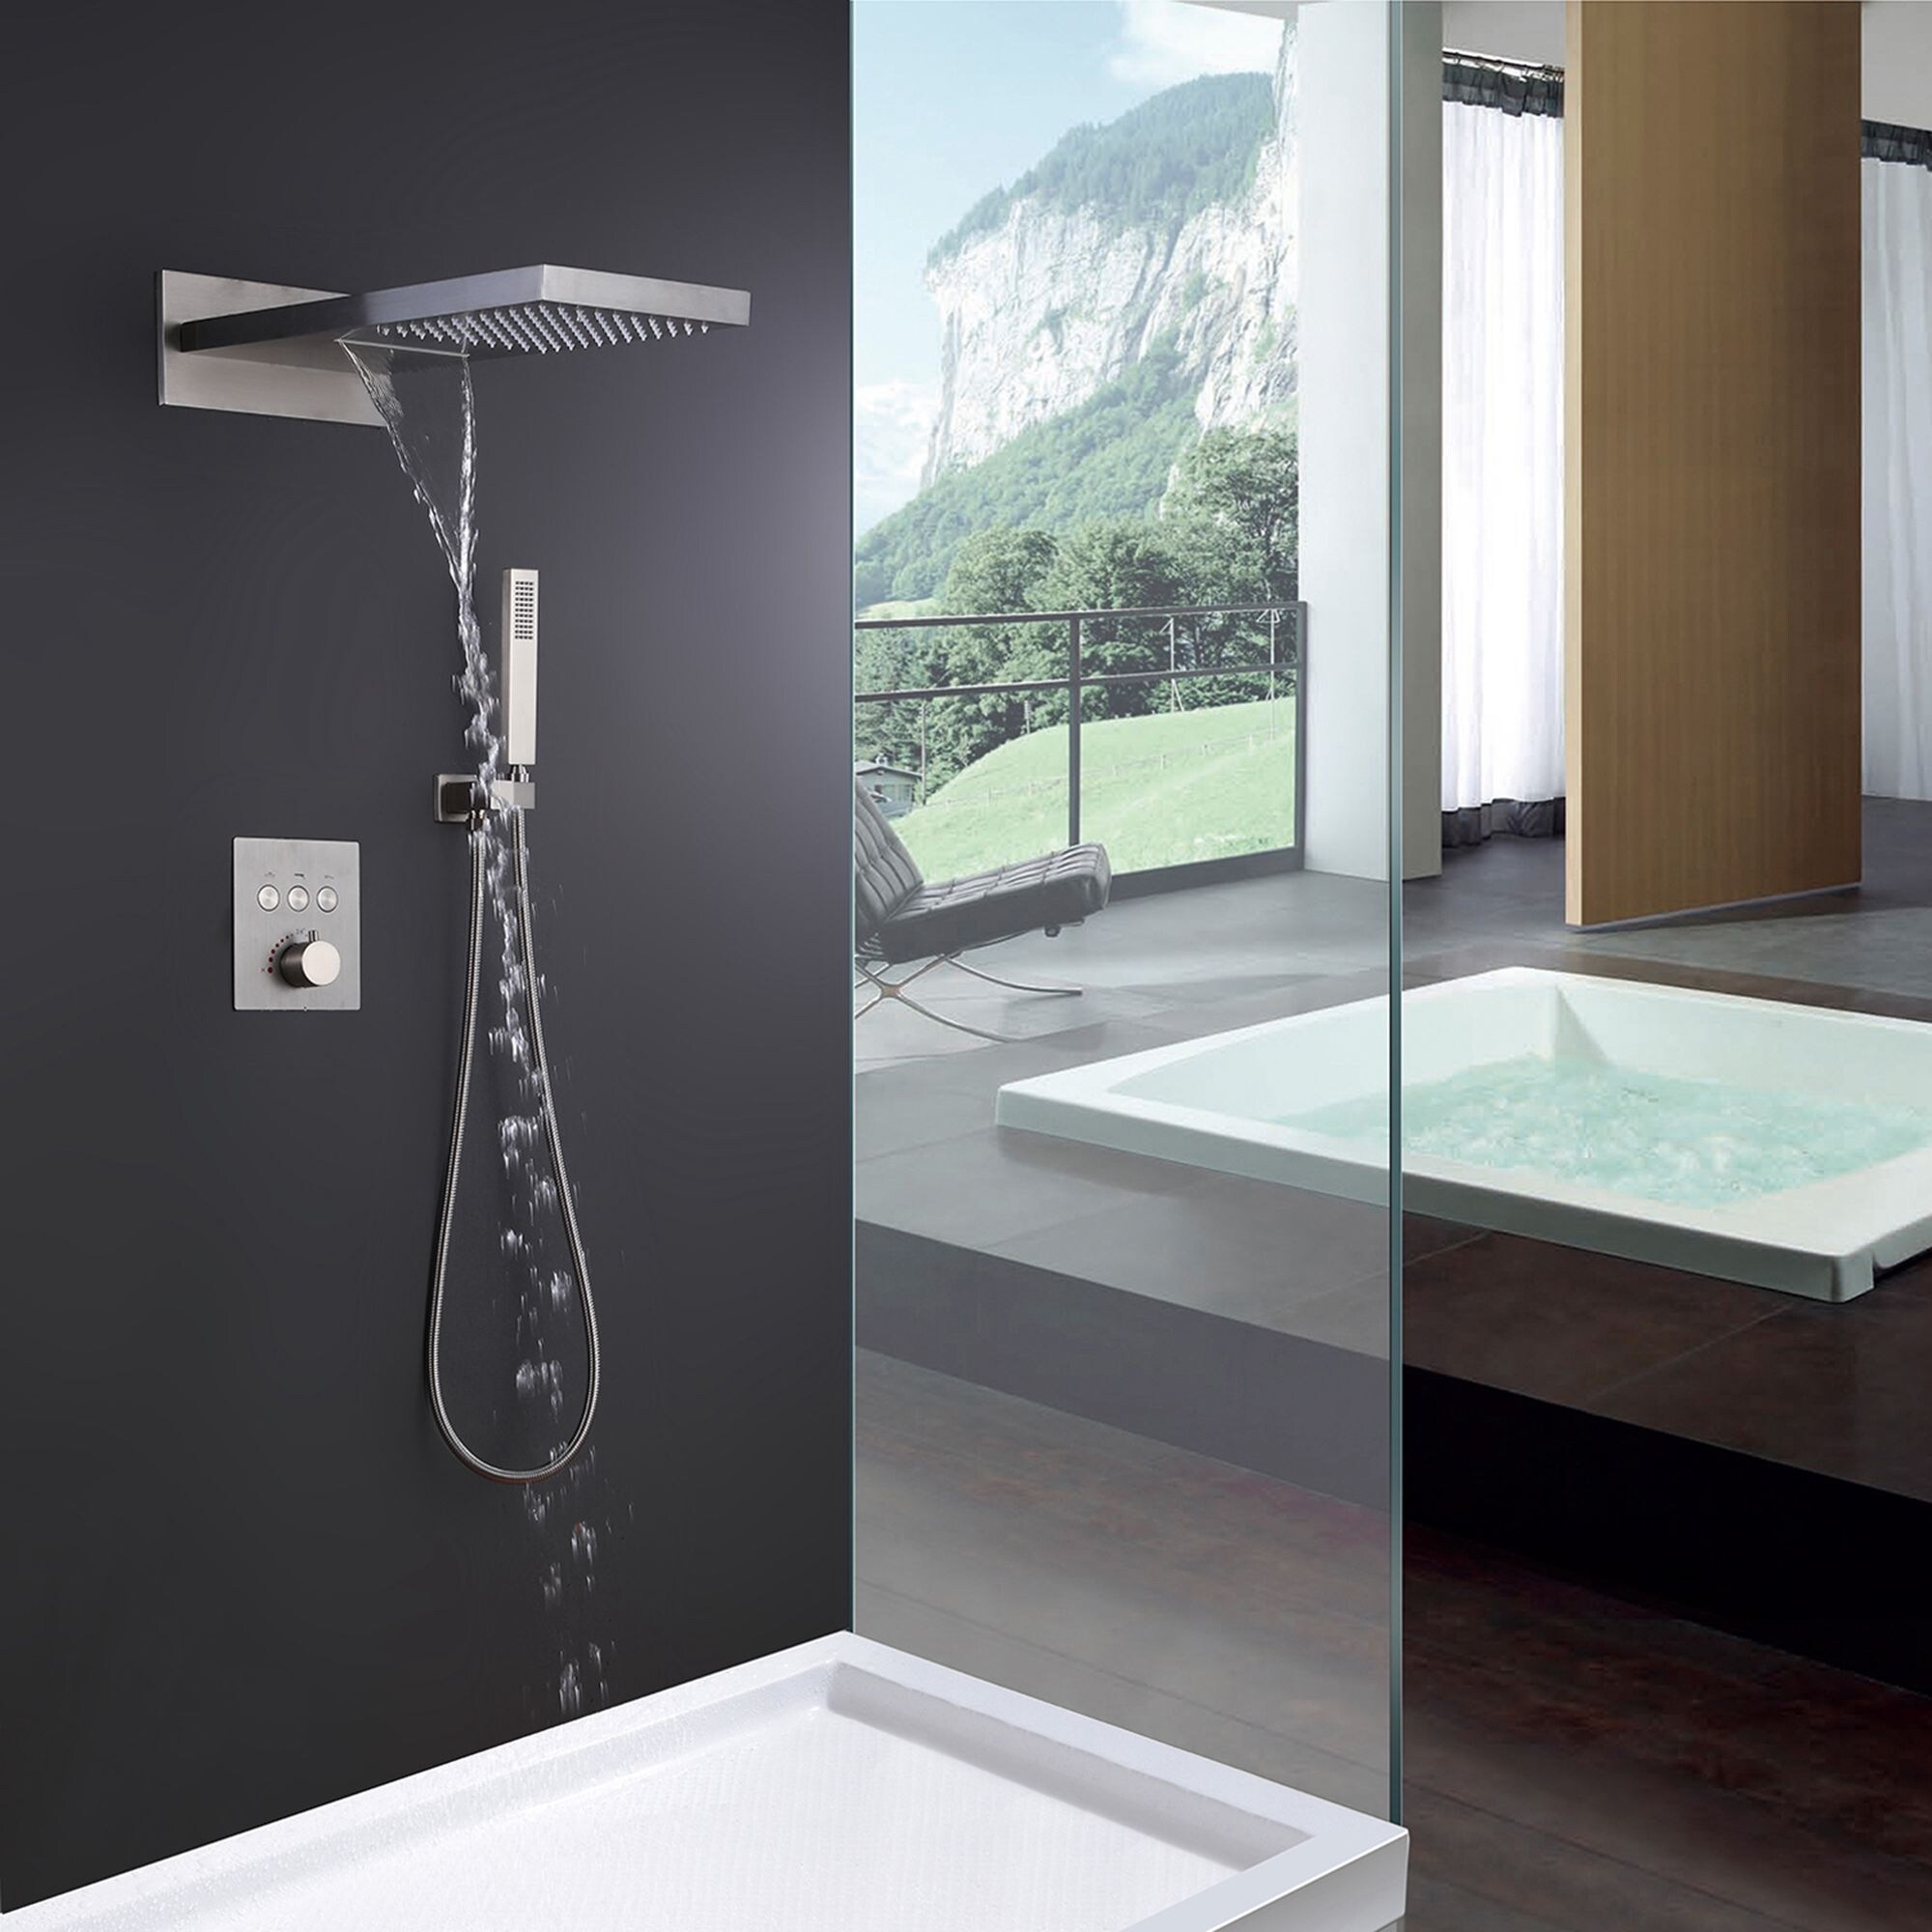 https://ak1.ostkcdn.com/images/products/is/images/direct/c85b3ce2bf07aebe768116ce5046144d09dc2627/Thermostatic-Complete-Shower-System-with-Rough-in-Valve.jpg